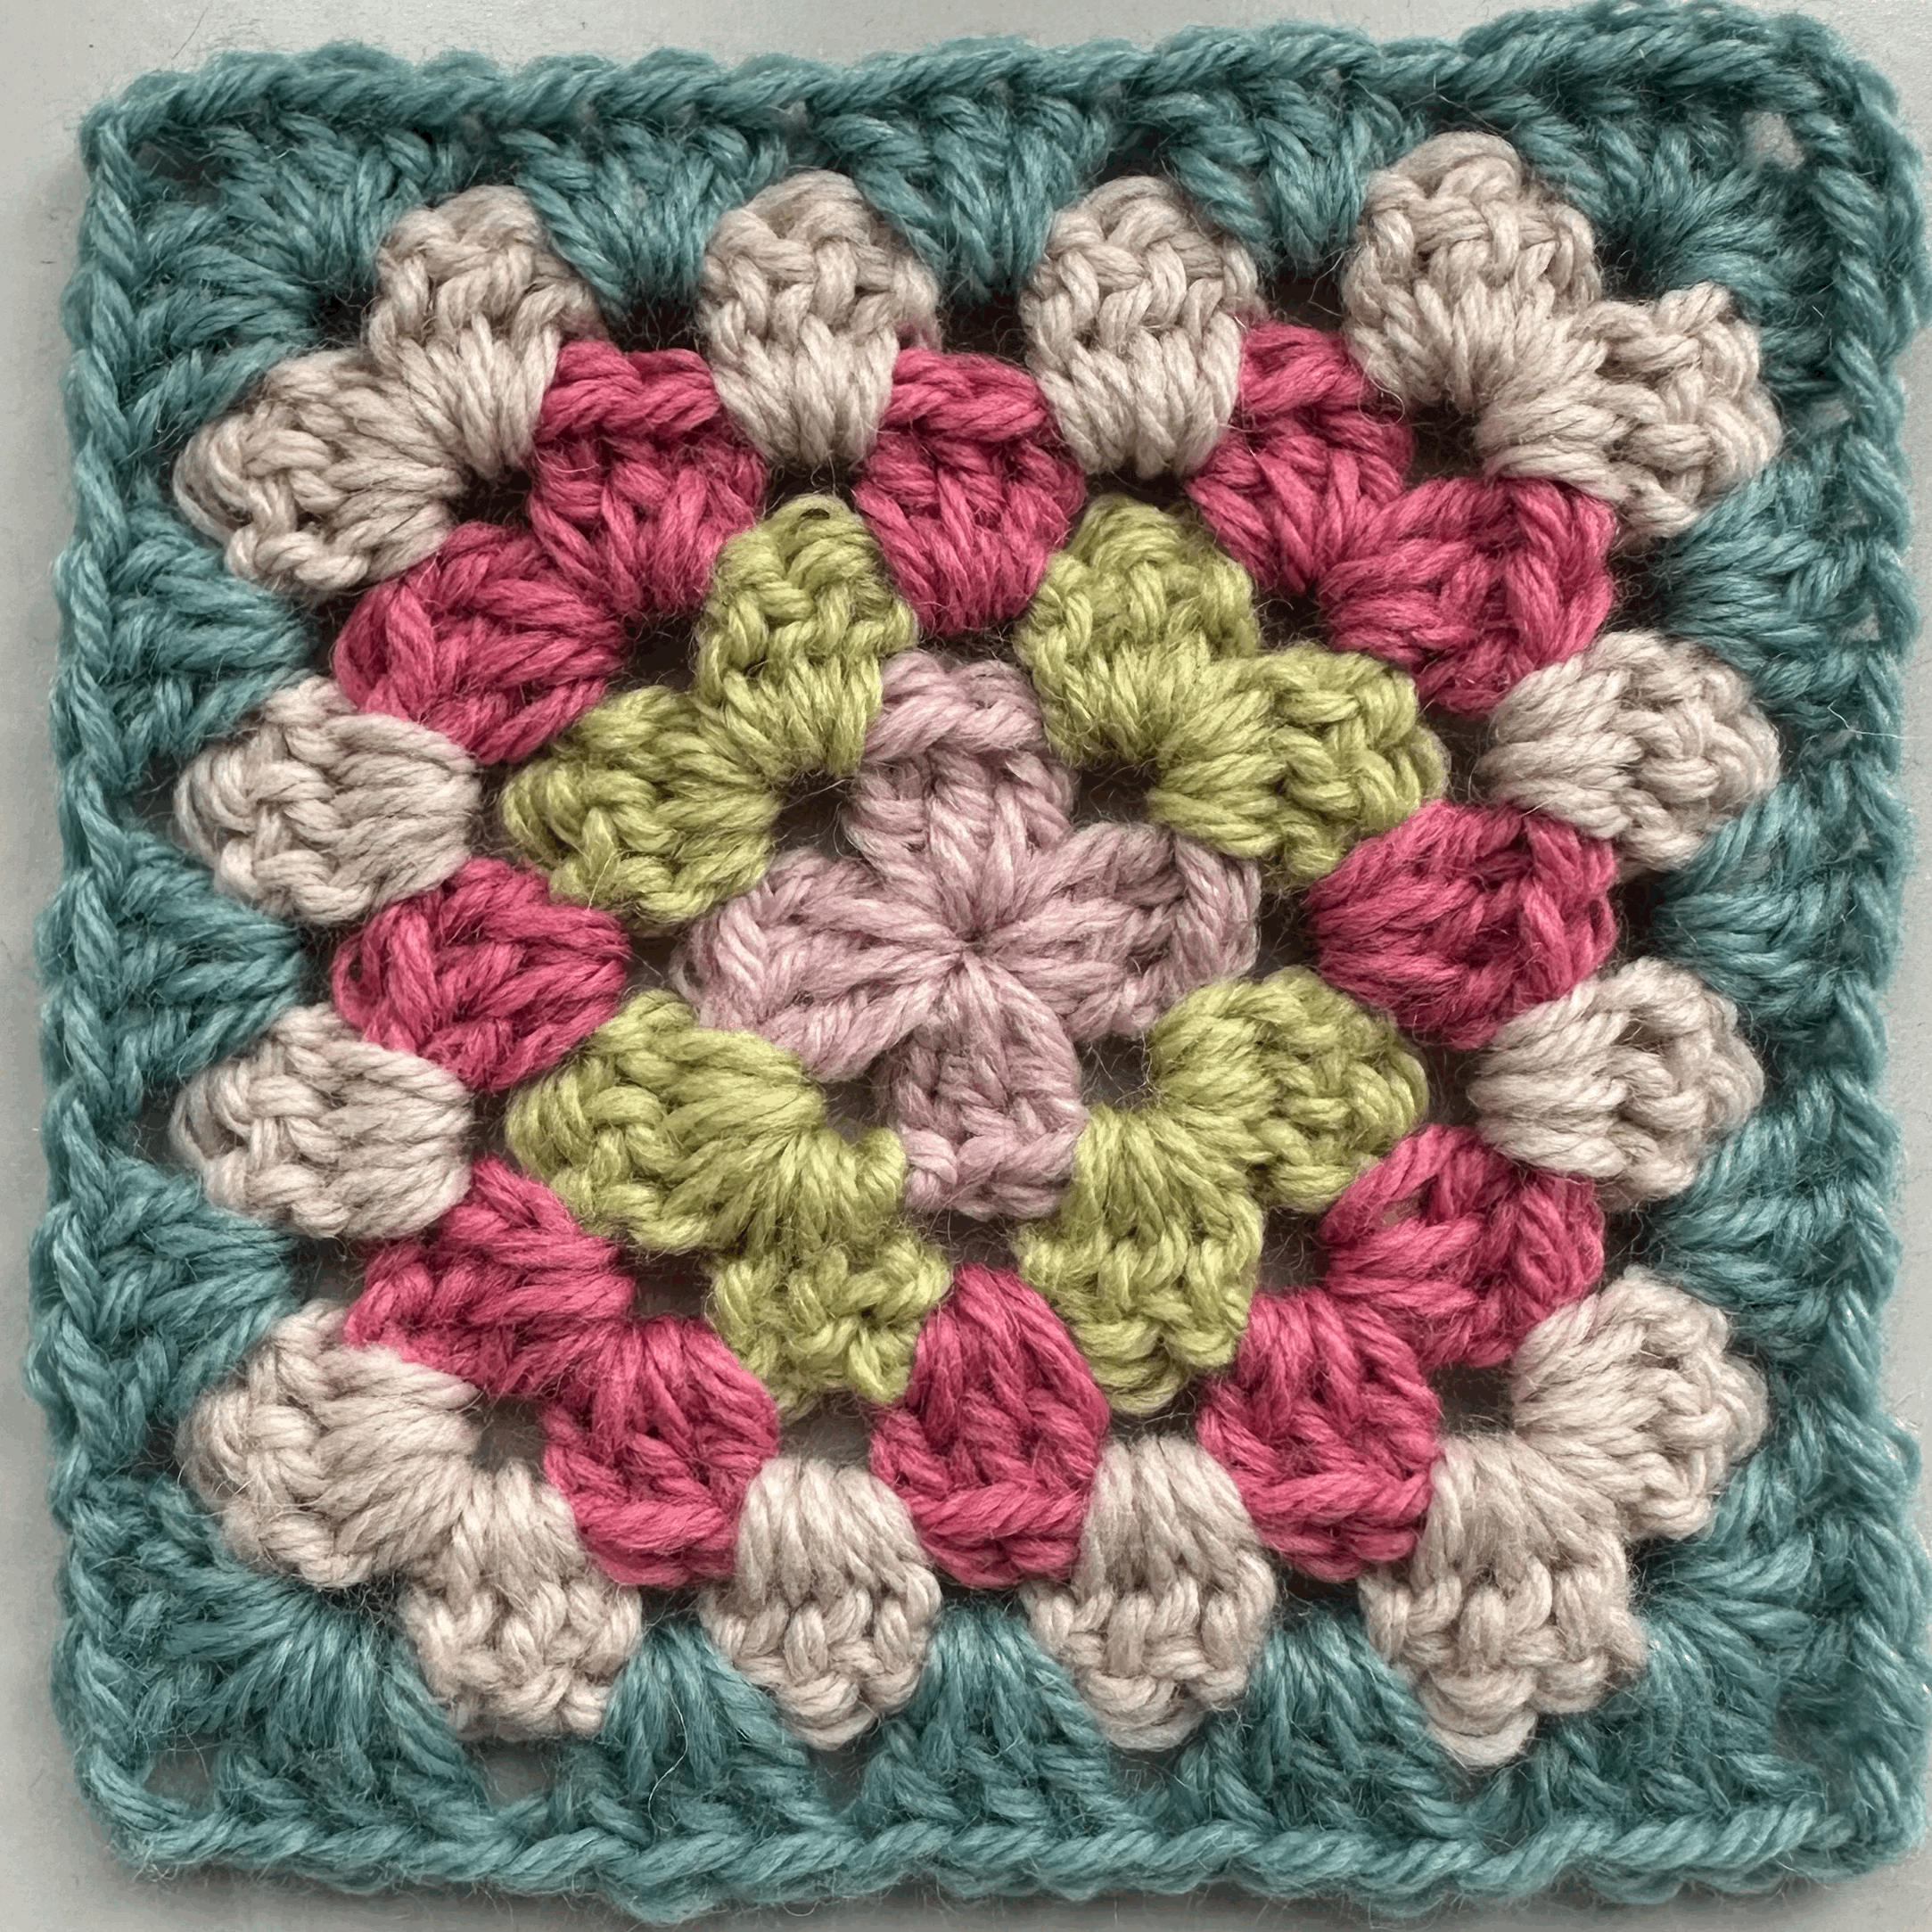 10 Trending Crochet Granny Square Patterns To Try Now - Nicki's